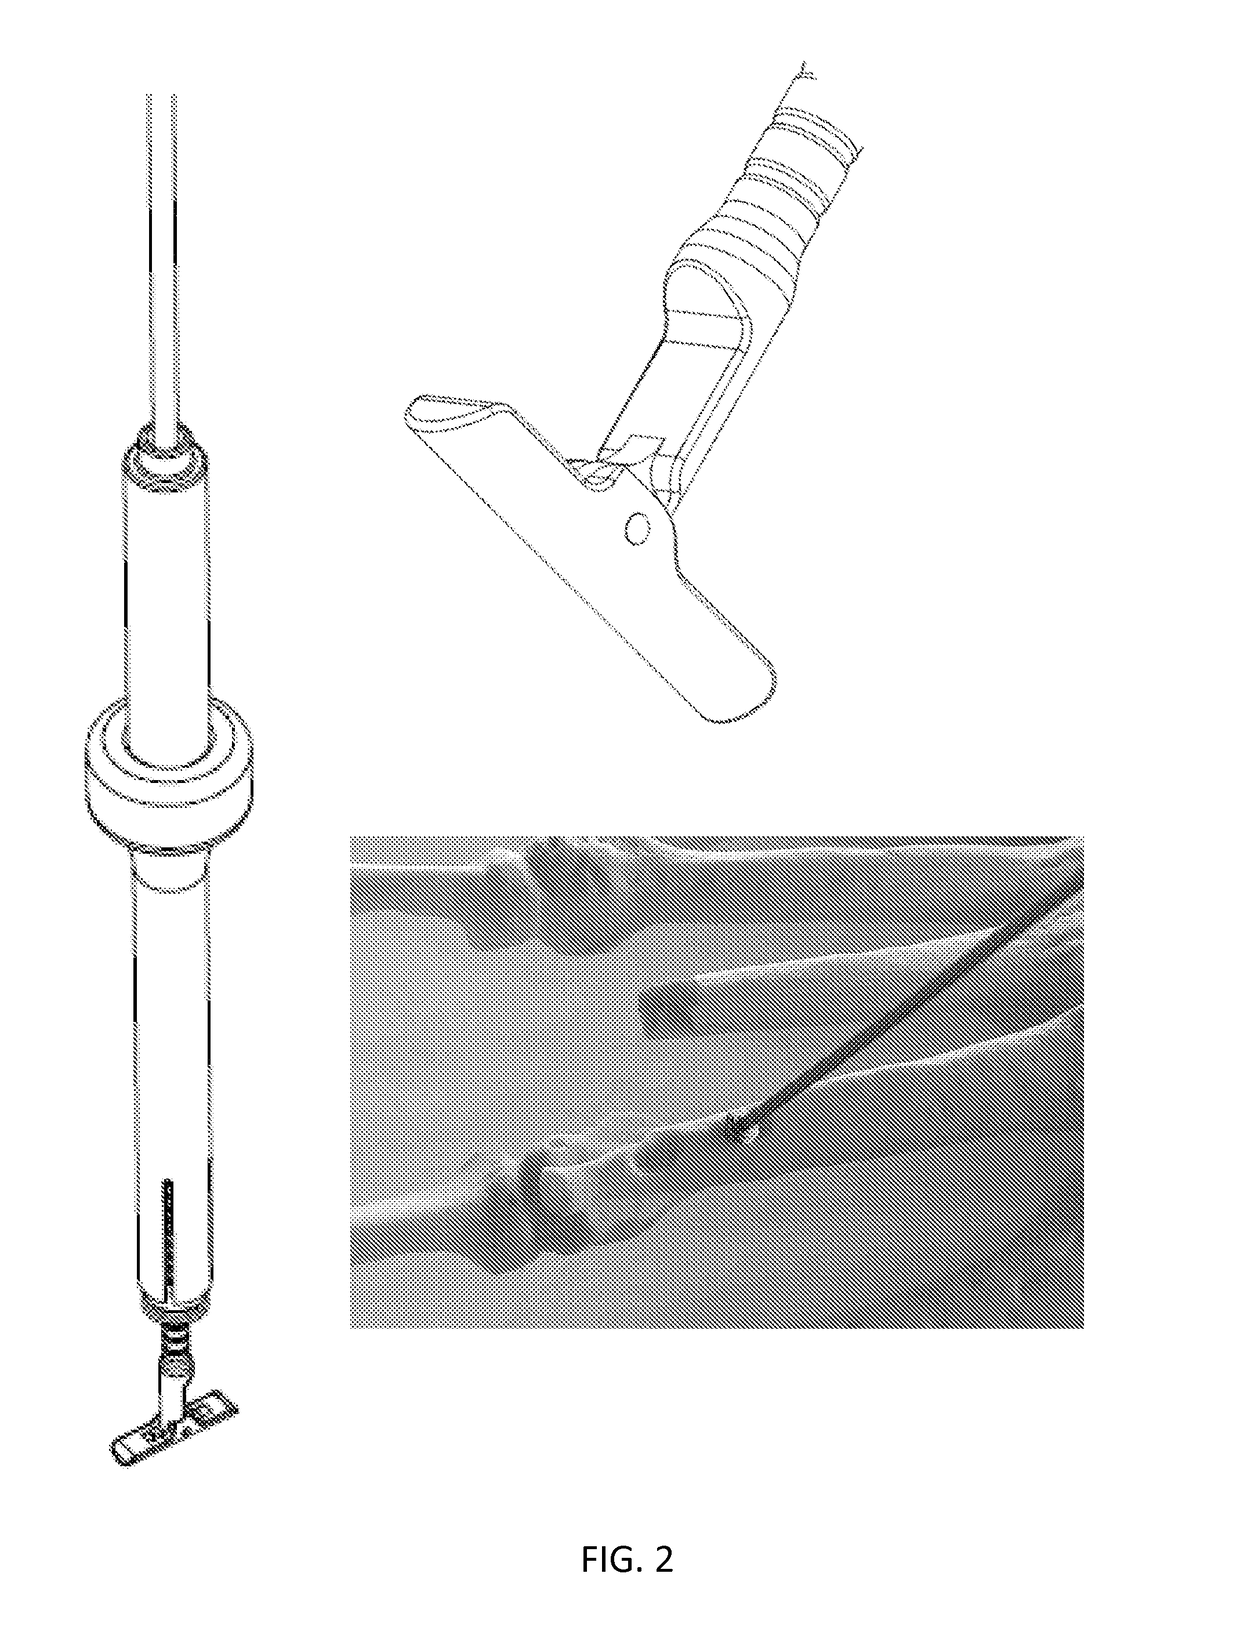 Compression fixation system